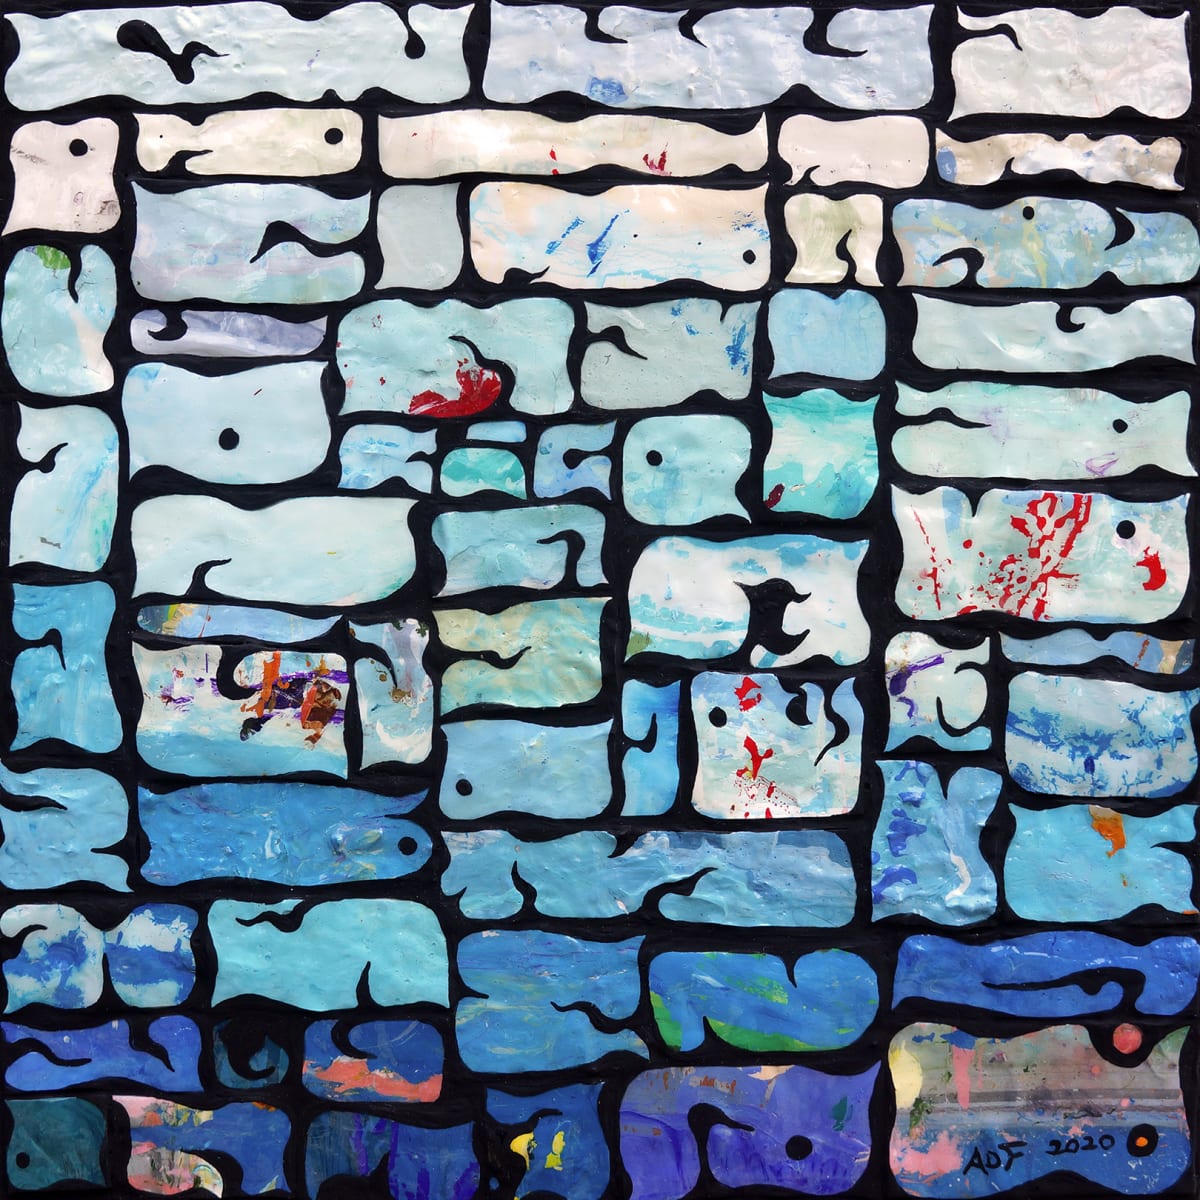 Blue Scraps of Sky by Amy Ferrari  Image: And acrylic tile mosaic!